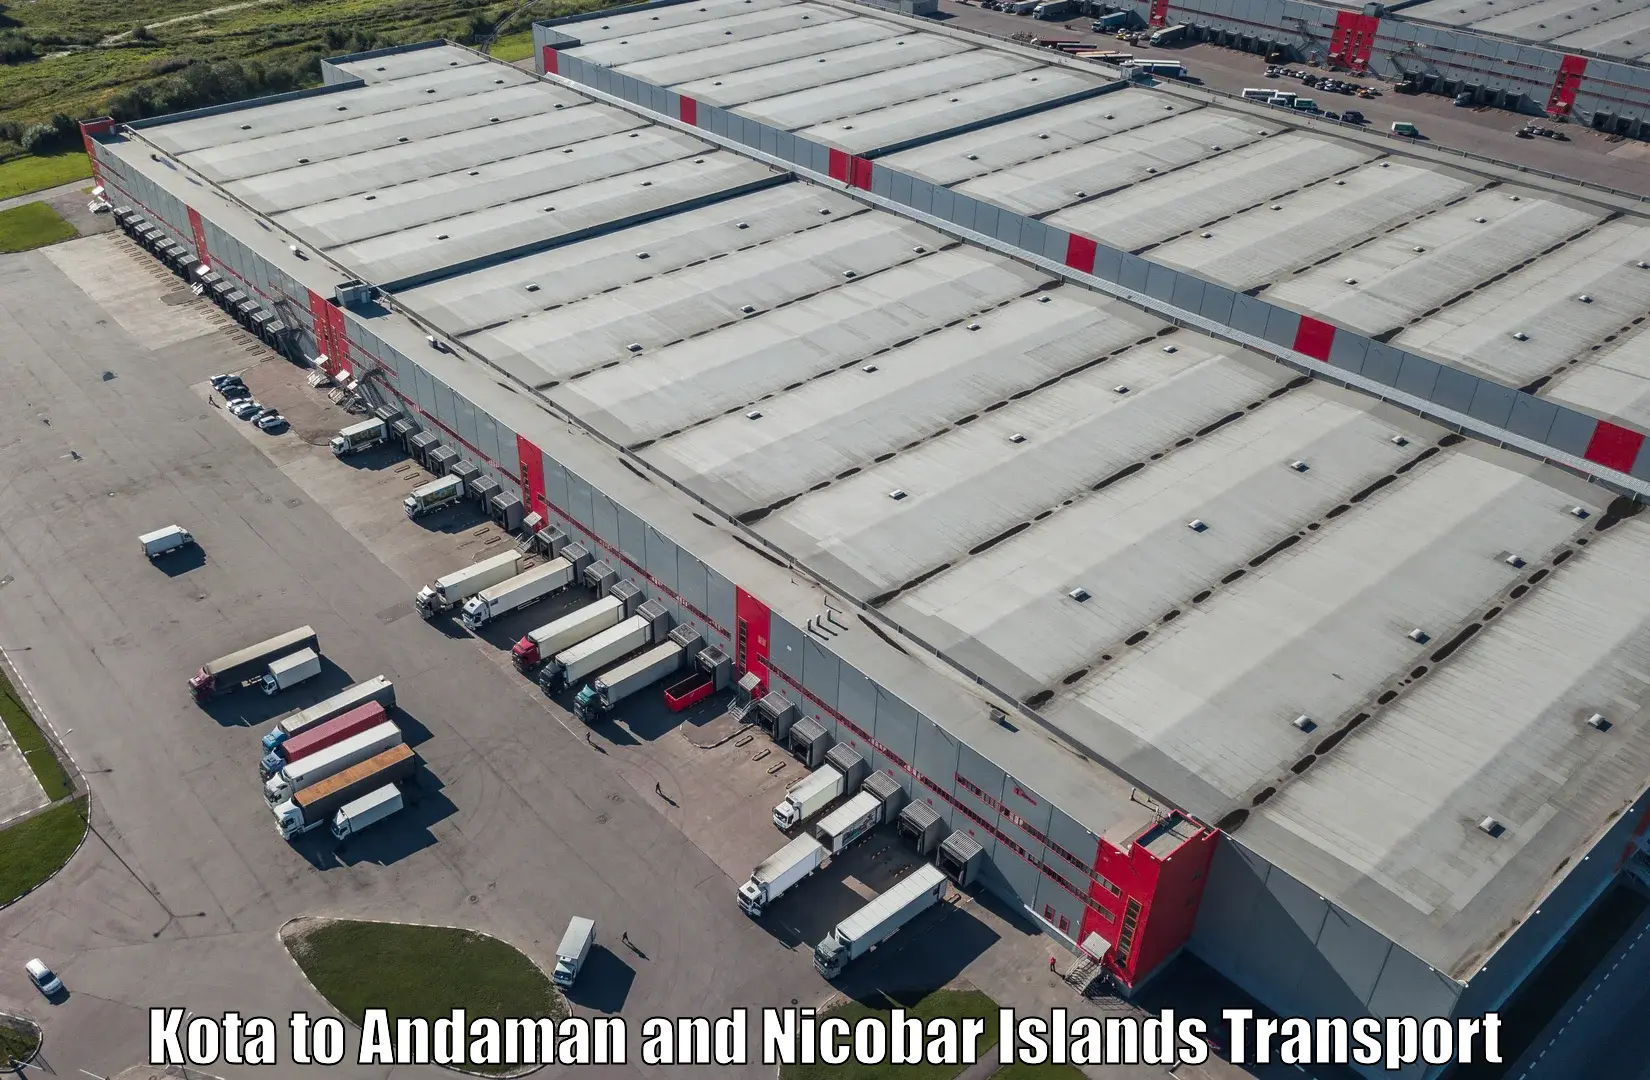 Goods delivery service Kota to Andaman and Nicobar Islands